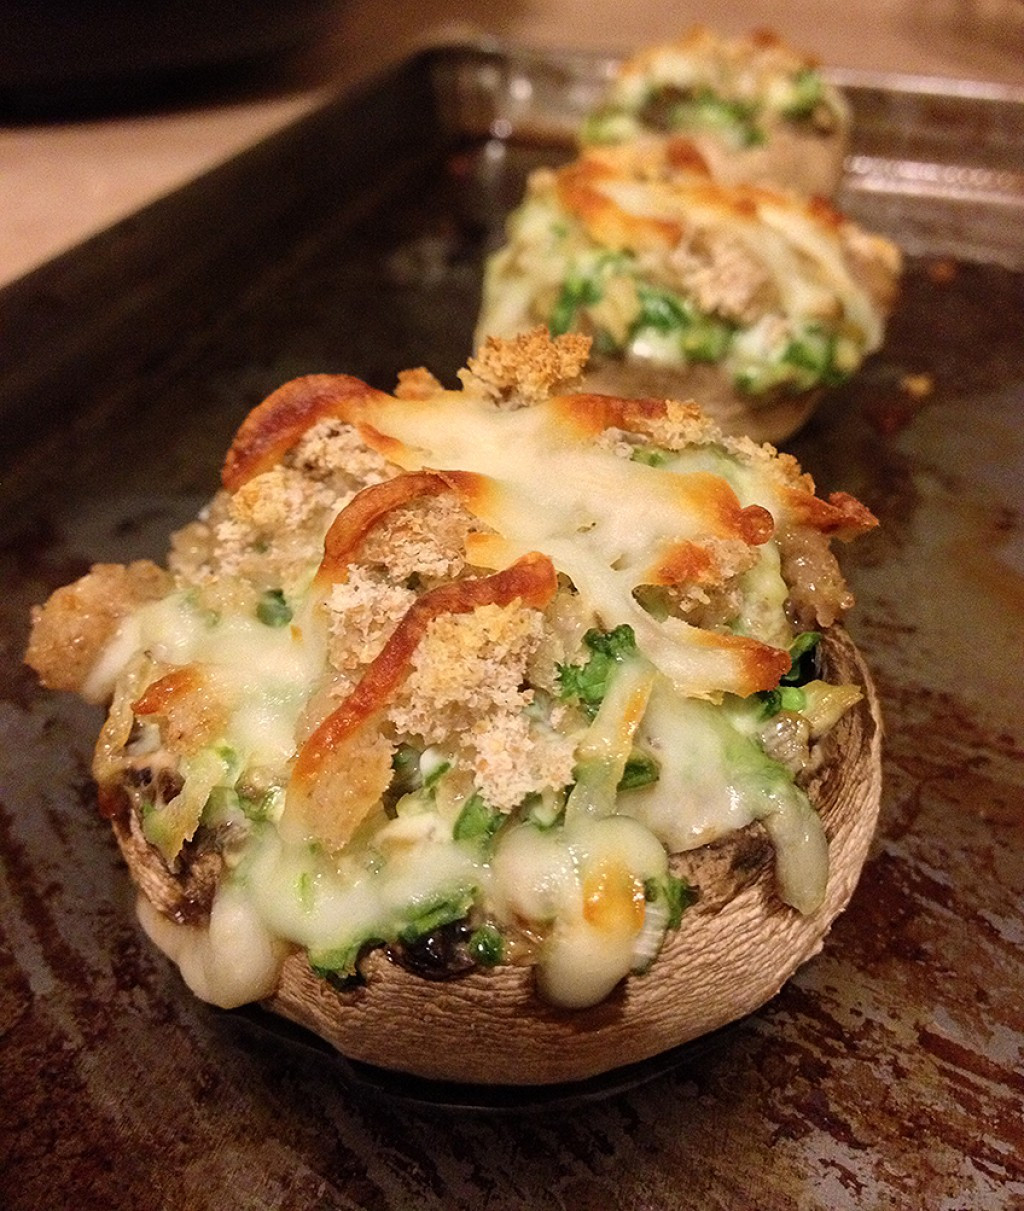 Mushroom Cap Recipe
 Oven Baked Spinach and Cheese Stuffed Mushrooms With